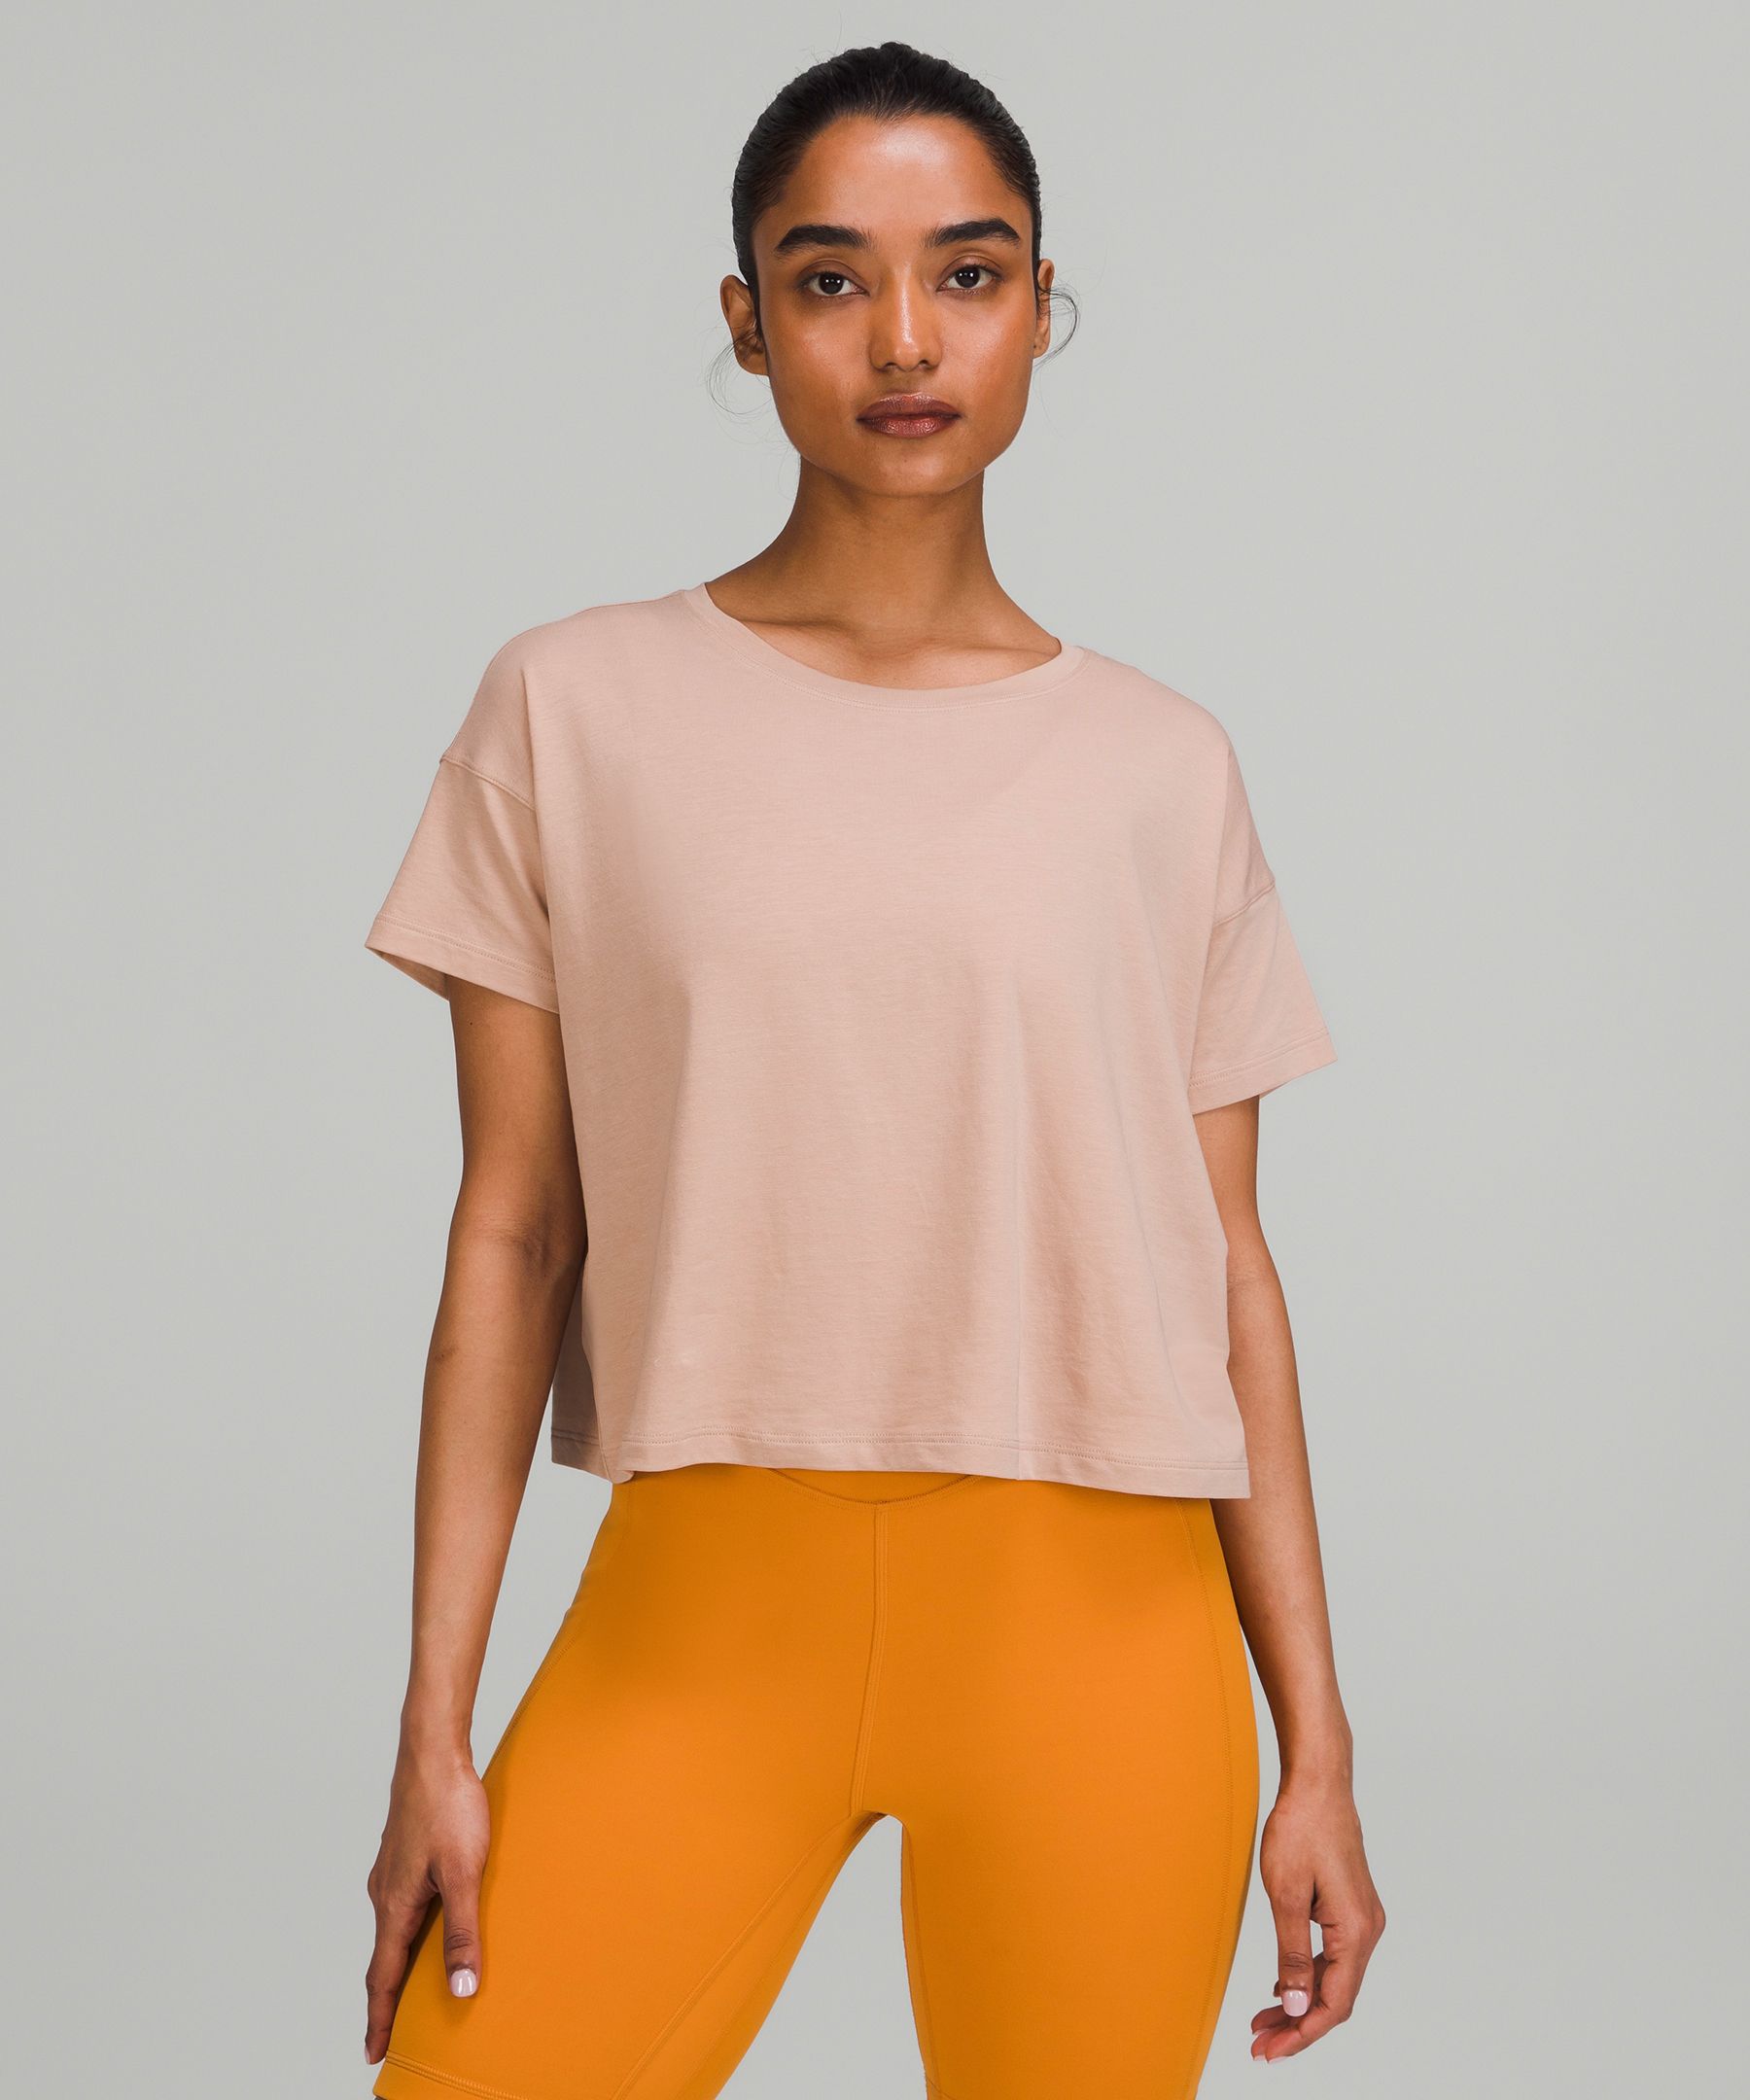 Lululemon Cates T-shirt In Pink Clay